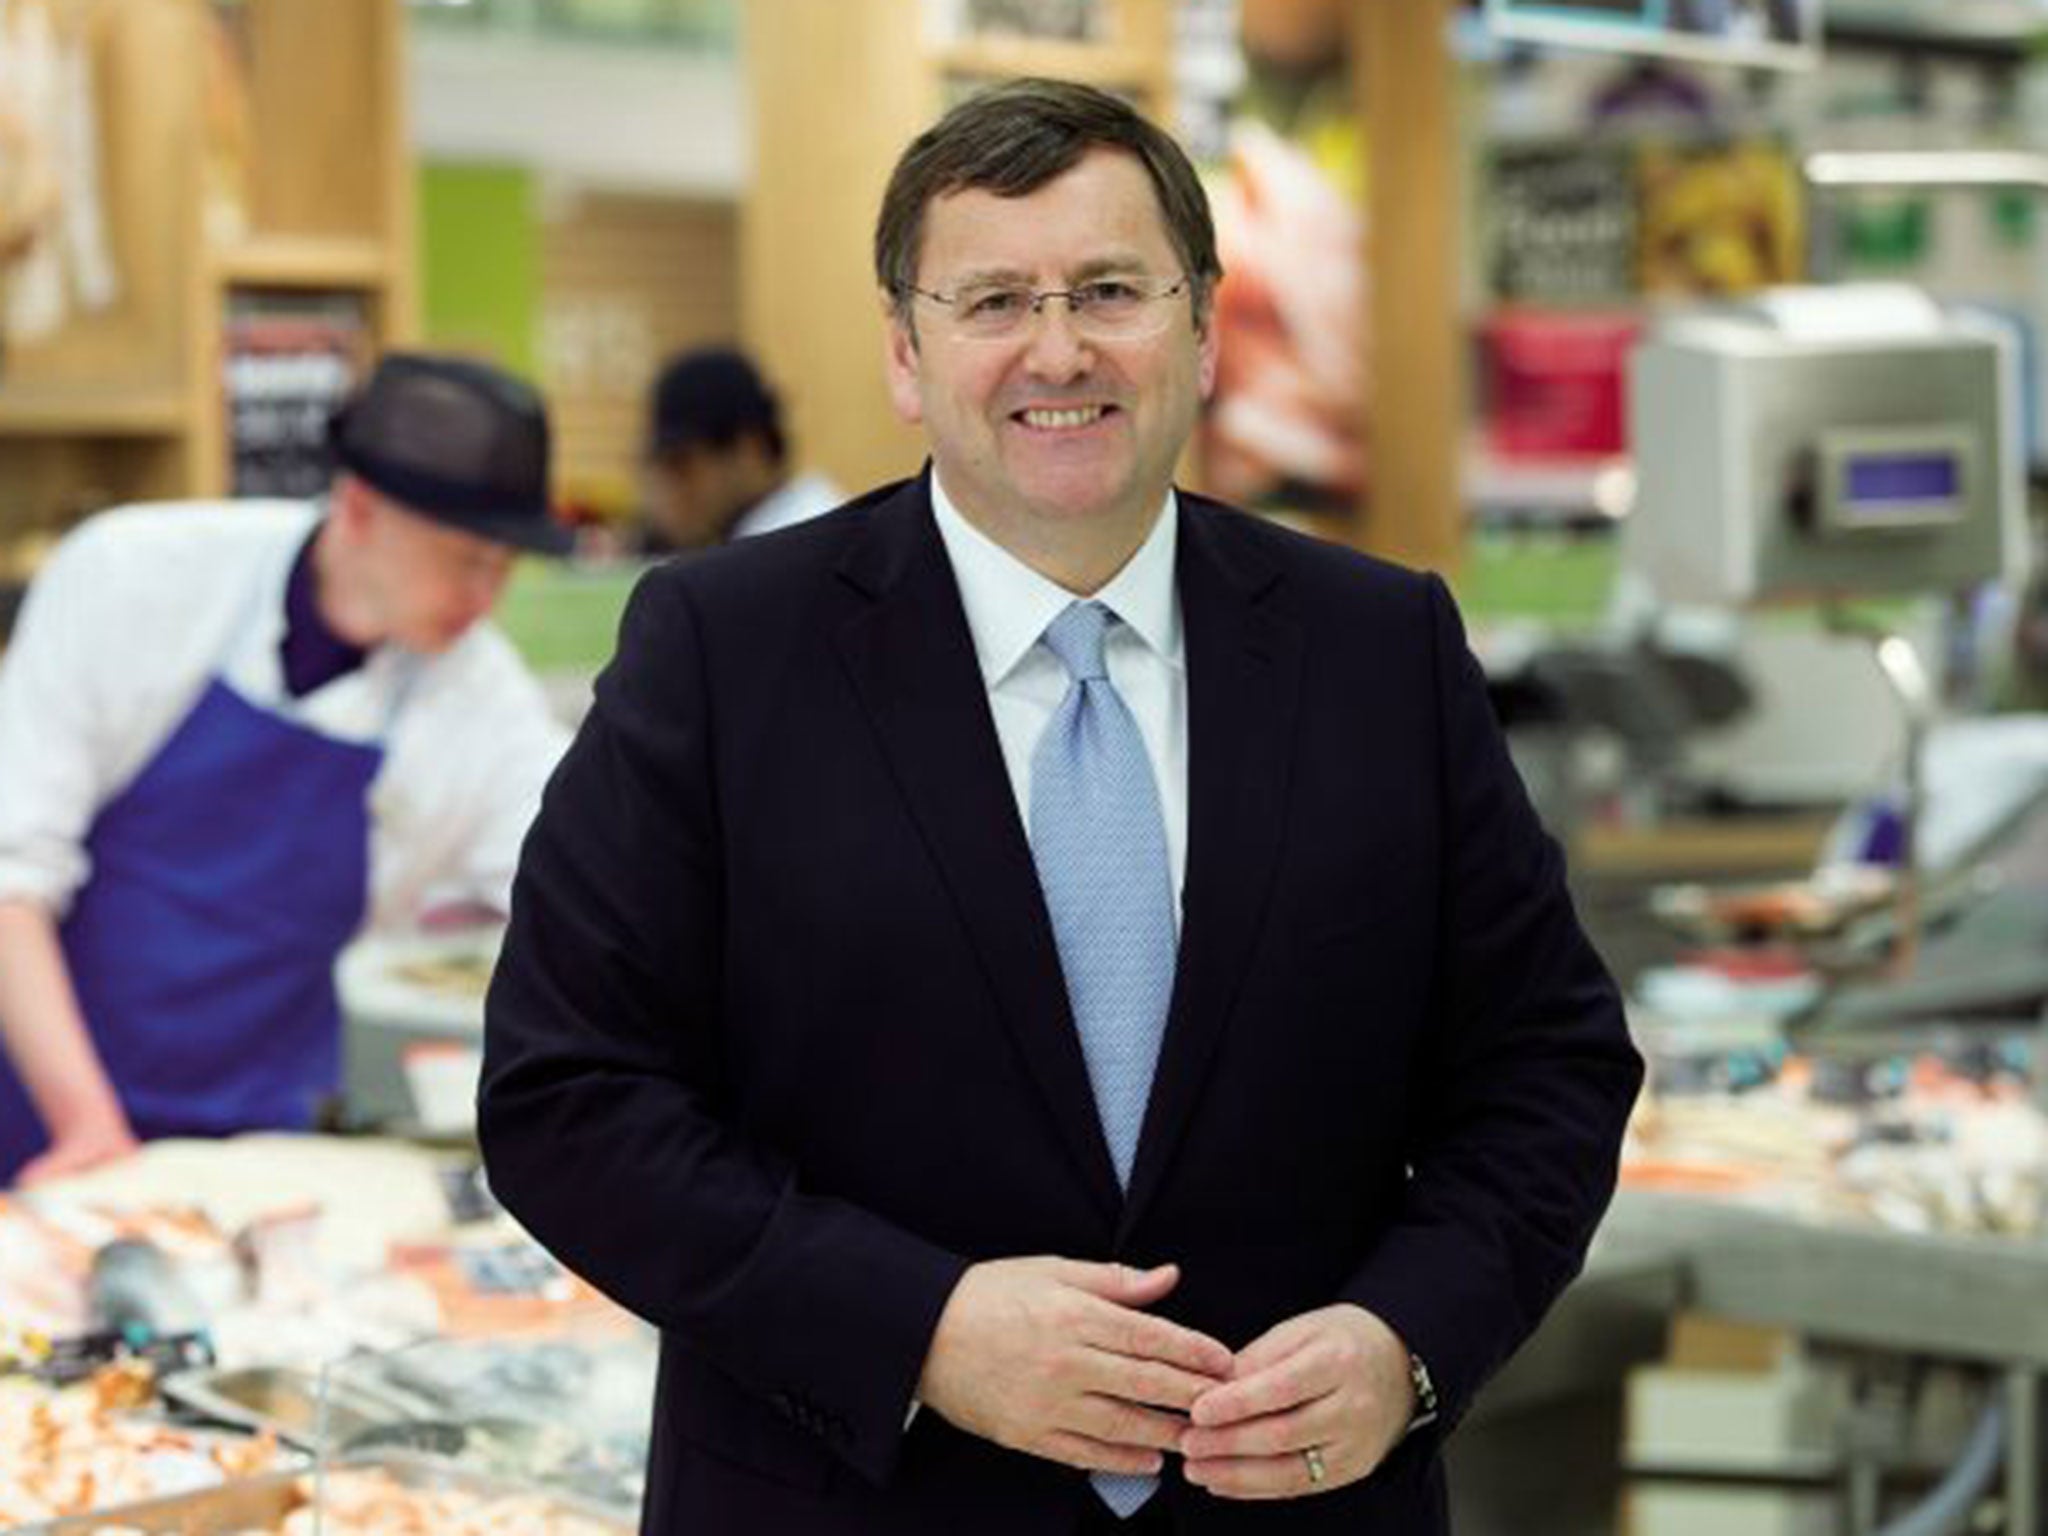 Former Tesco chief executive Phil Clarke, who began stacking shelves, left the company in July